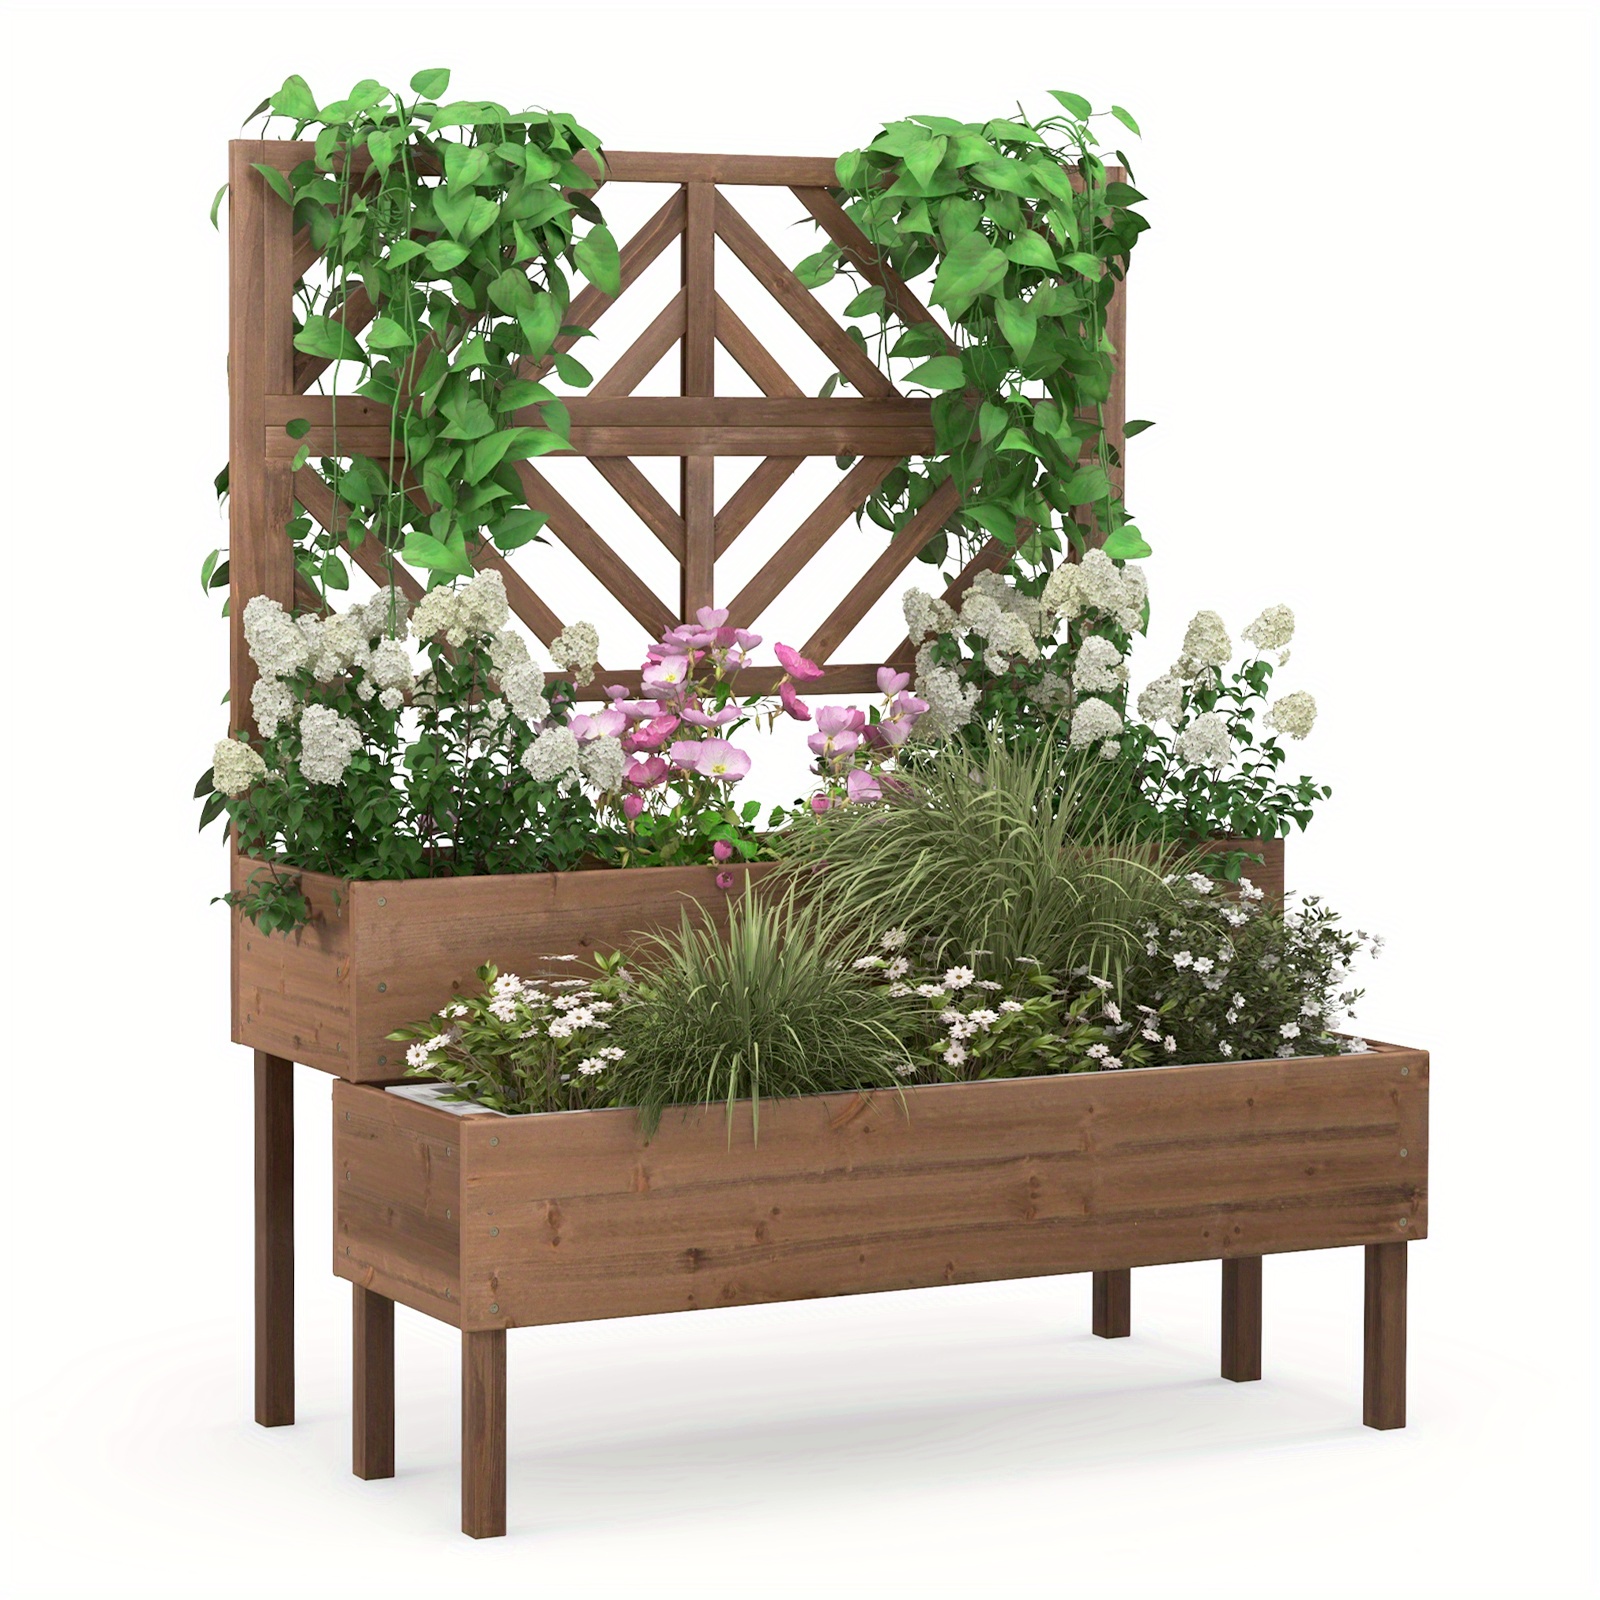 

Lifezeal 2-tier Raised Garden Bed W/ Trellis Wooden Elevated Planter Box For Vegetables